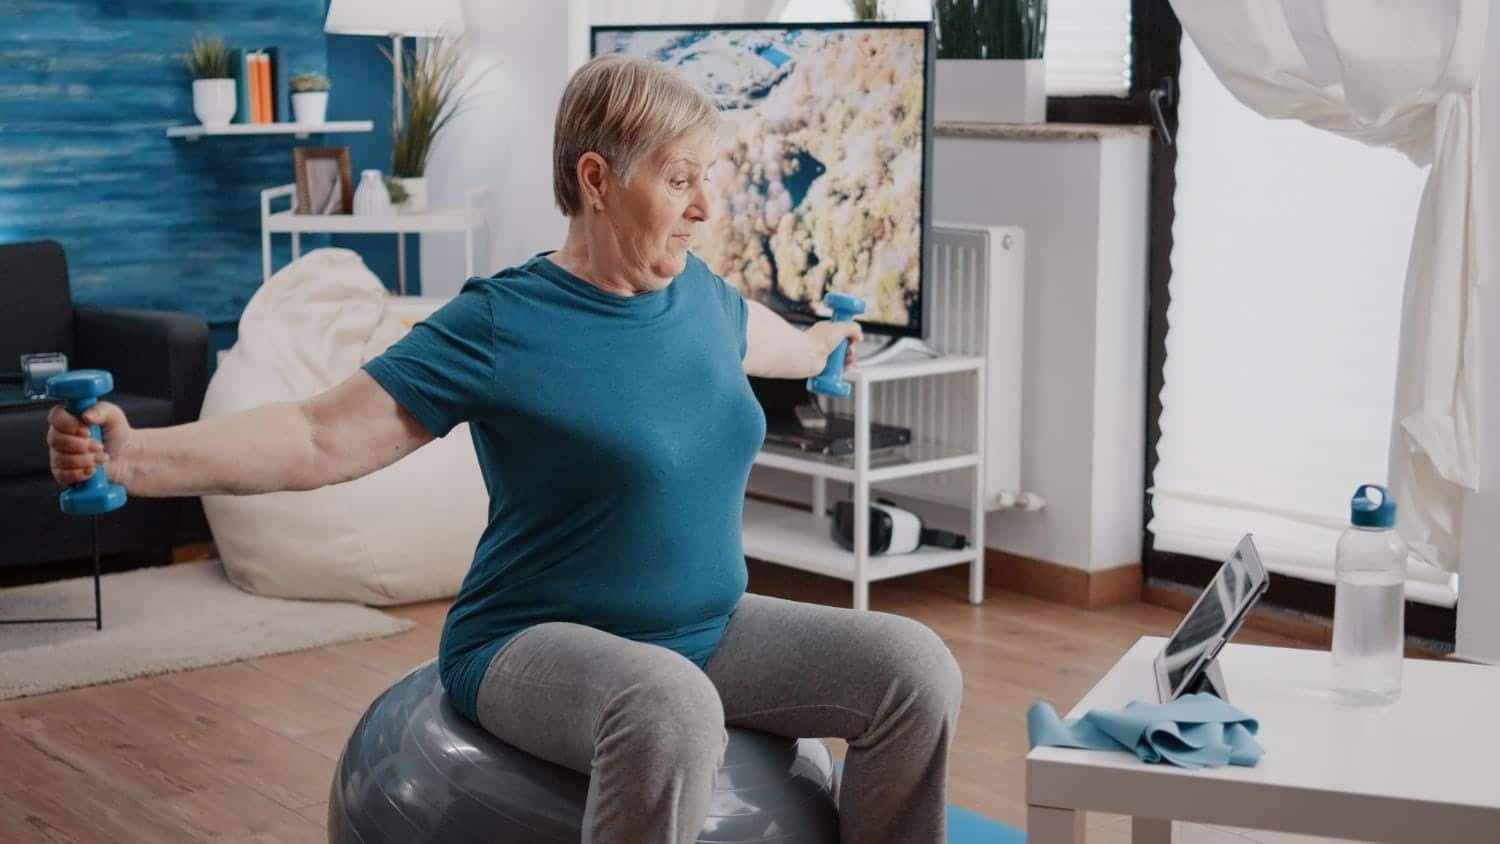 Aged woman watching video of workout lesson on tablet while doing physical exercise with dumbbells and sitting on toning ball. Old person following online training program with coach.